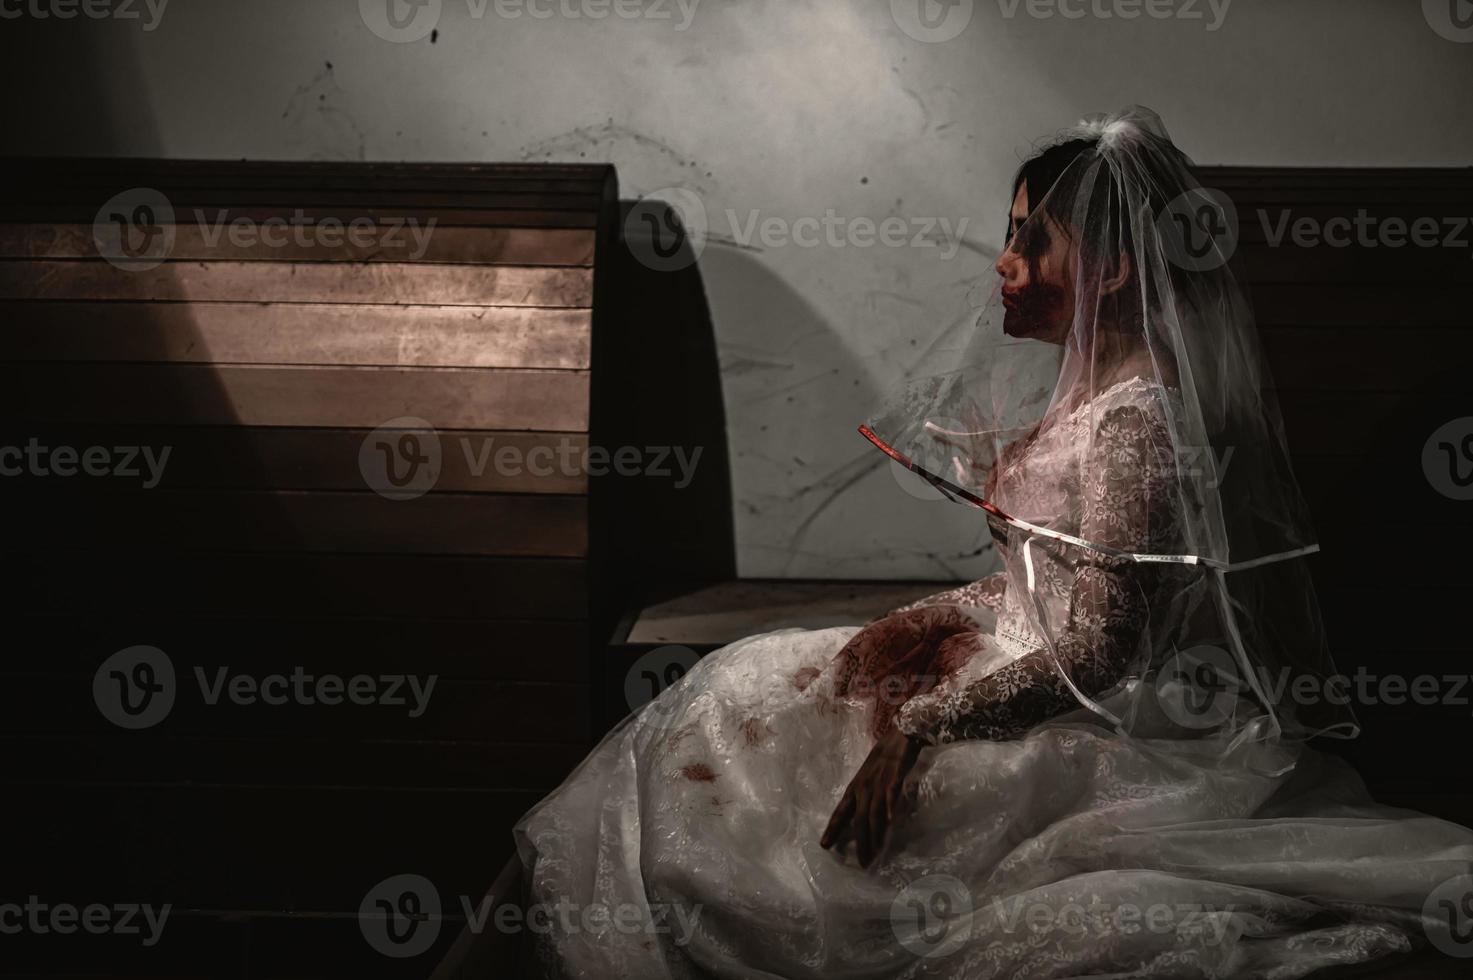 Halloween festival concept,Asian woman makeup ghost face,Bride zombie charactor,Horror movie wallpaper or poster photo